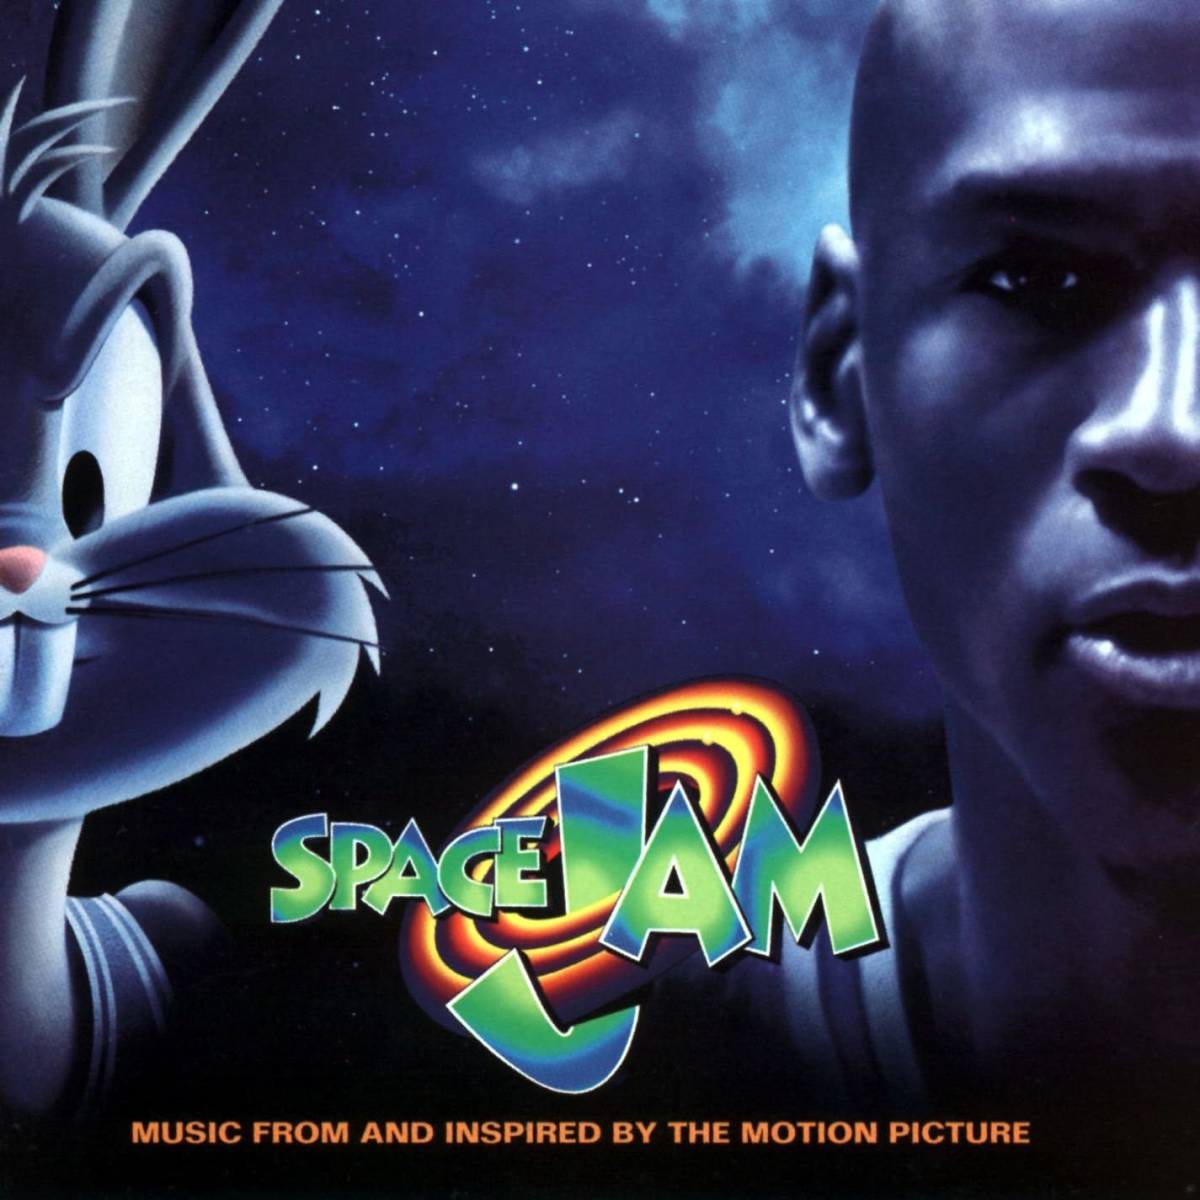 Space Jam: Music From And Inspired By The Motion Picture ジェームズ・ニュートン・ハワード 輸入盤CD_画像1